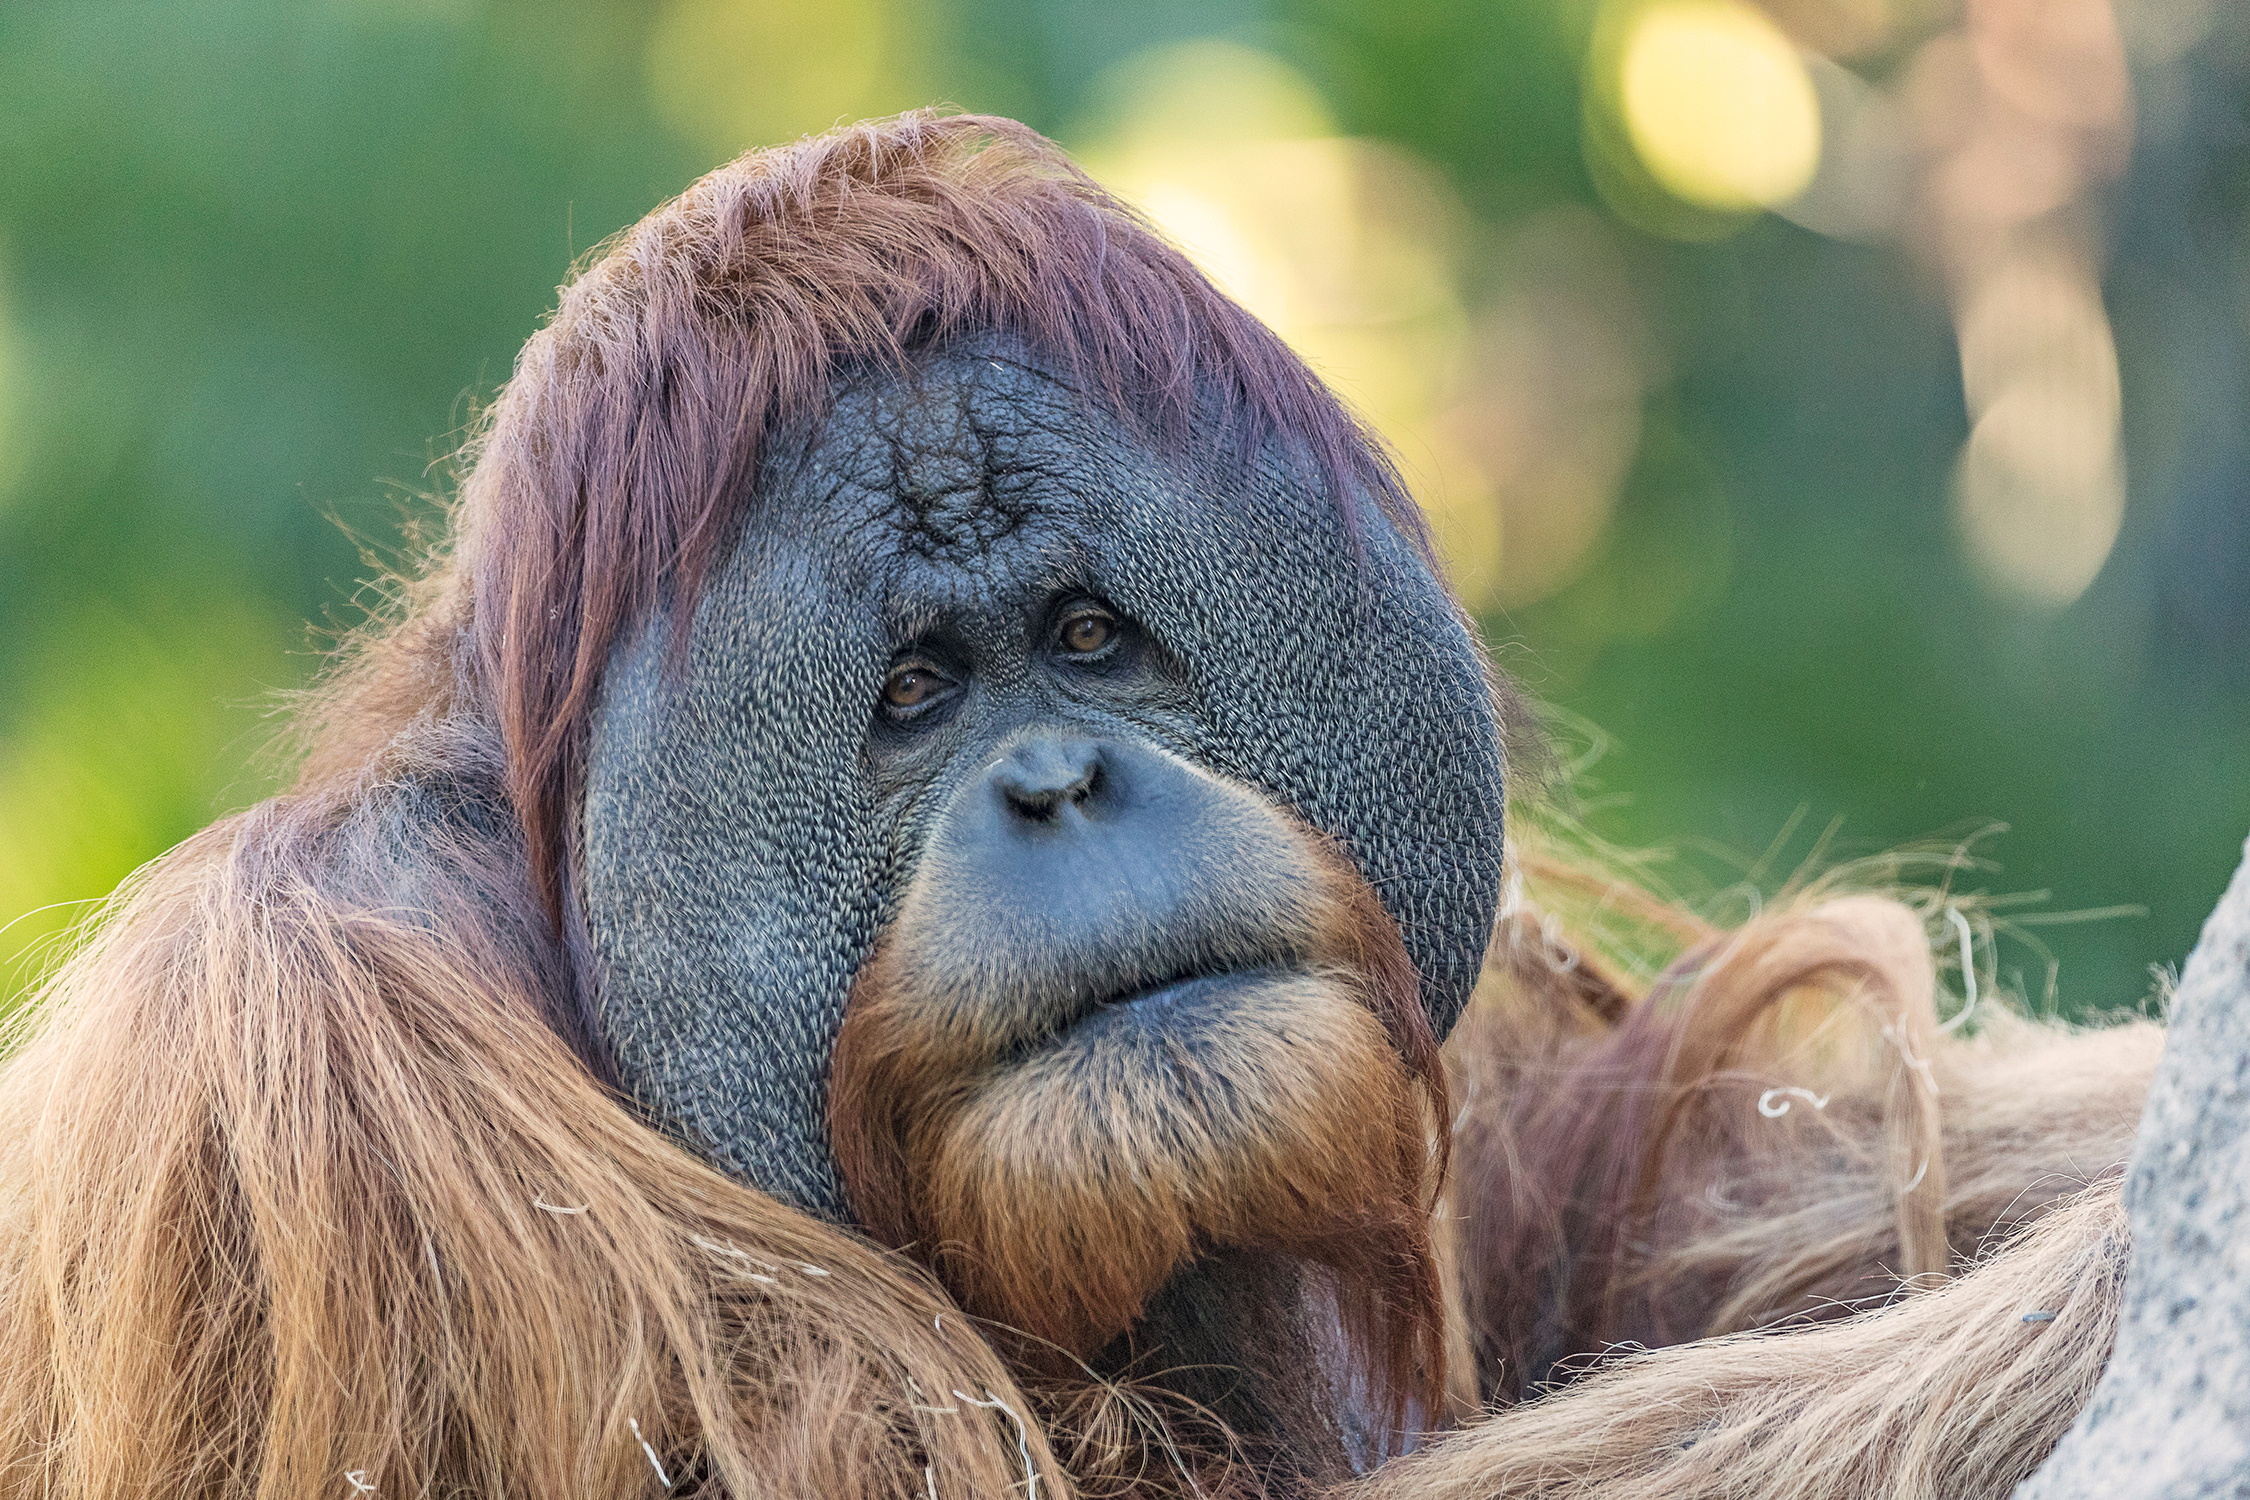 An orangutan who was recently vaccinated against COVID-19 at the San Diego Zoo